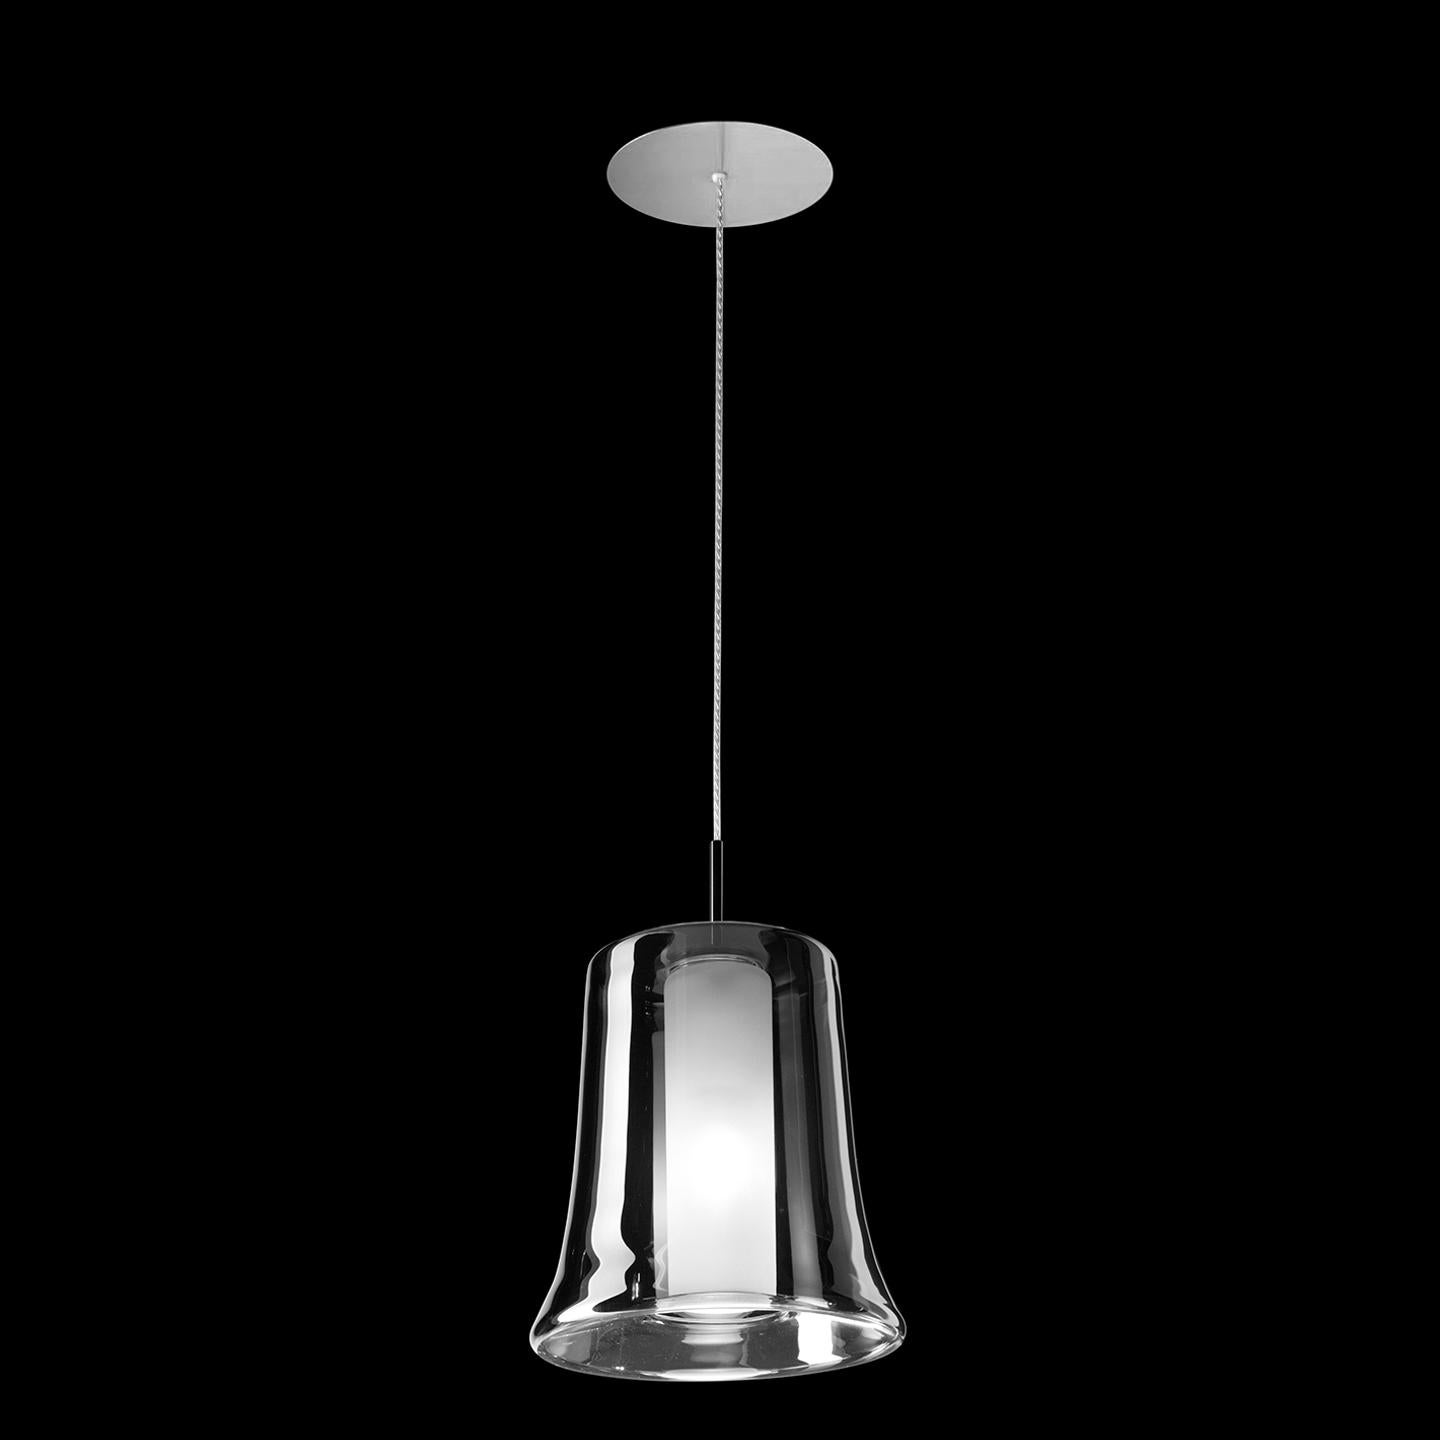 The Cloche collection was designed by Danilo De Rossi in 2013 using a clever, two-tone glass layering technique that transforms the Cloche’s simple form into a complex and dynamic lighting statement. Cloche is composed of a clear glass exterior